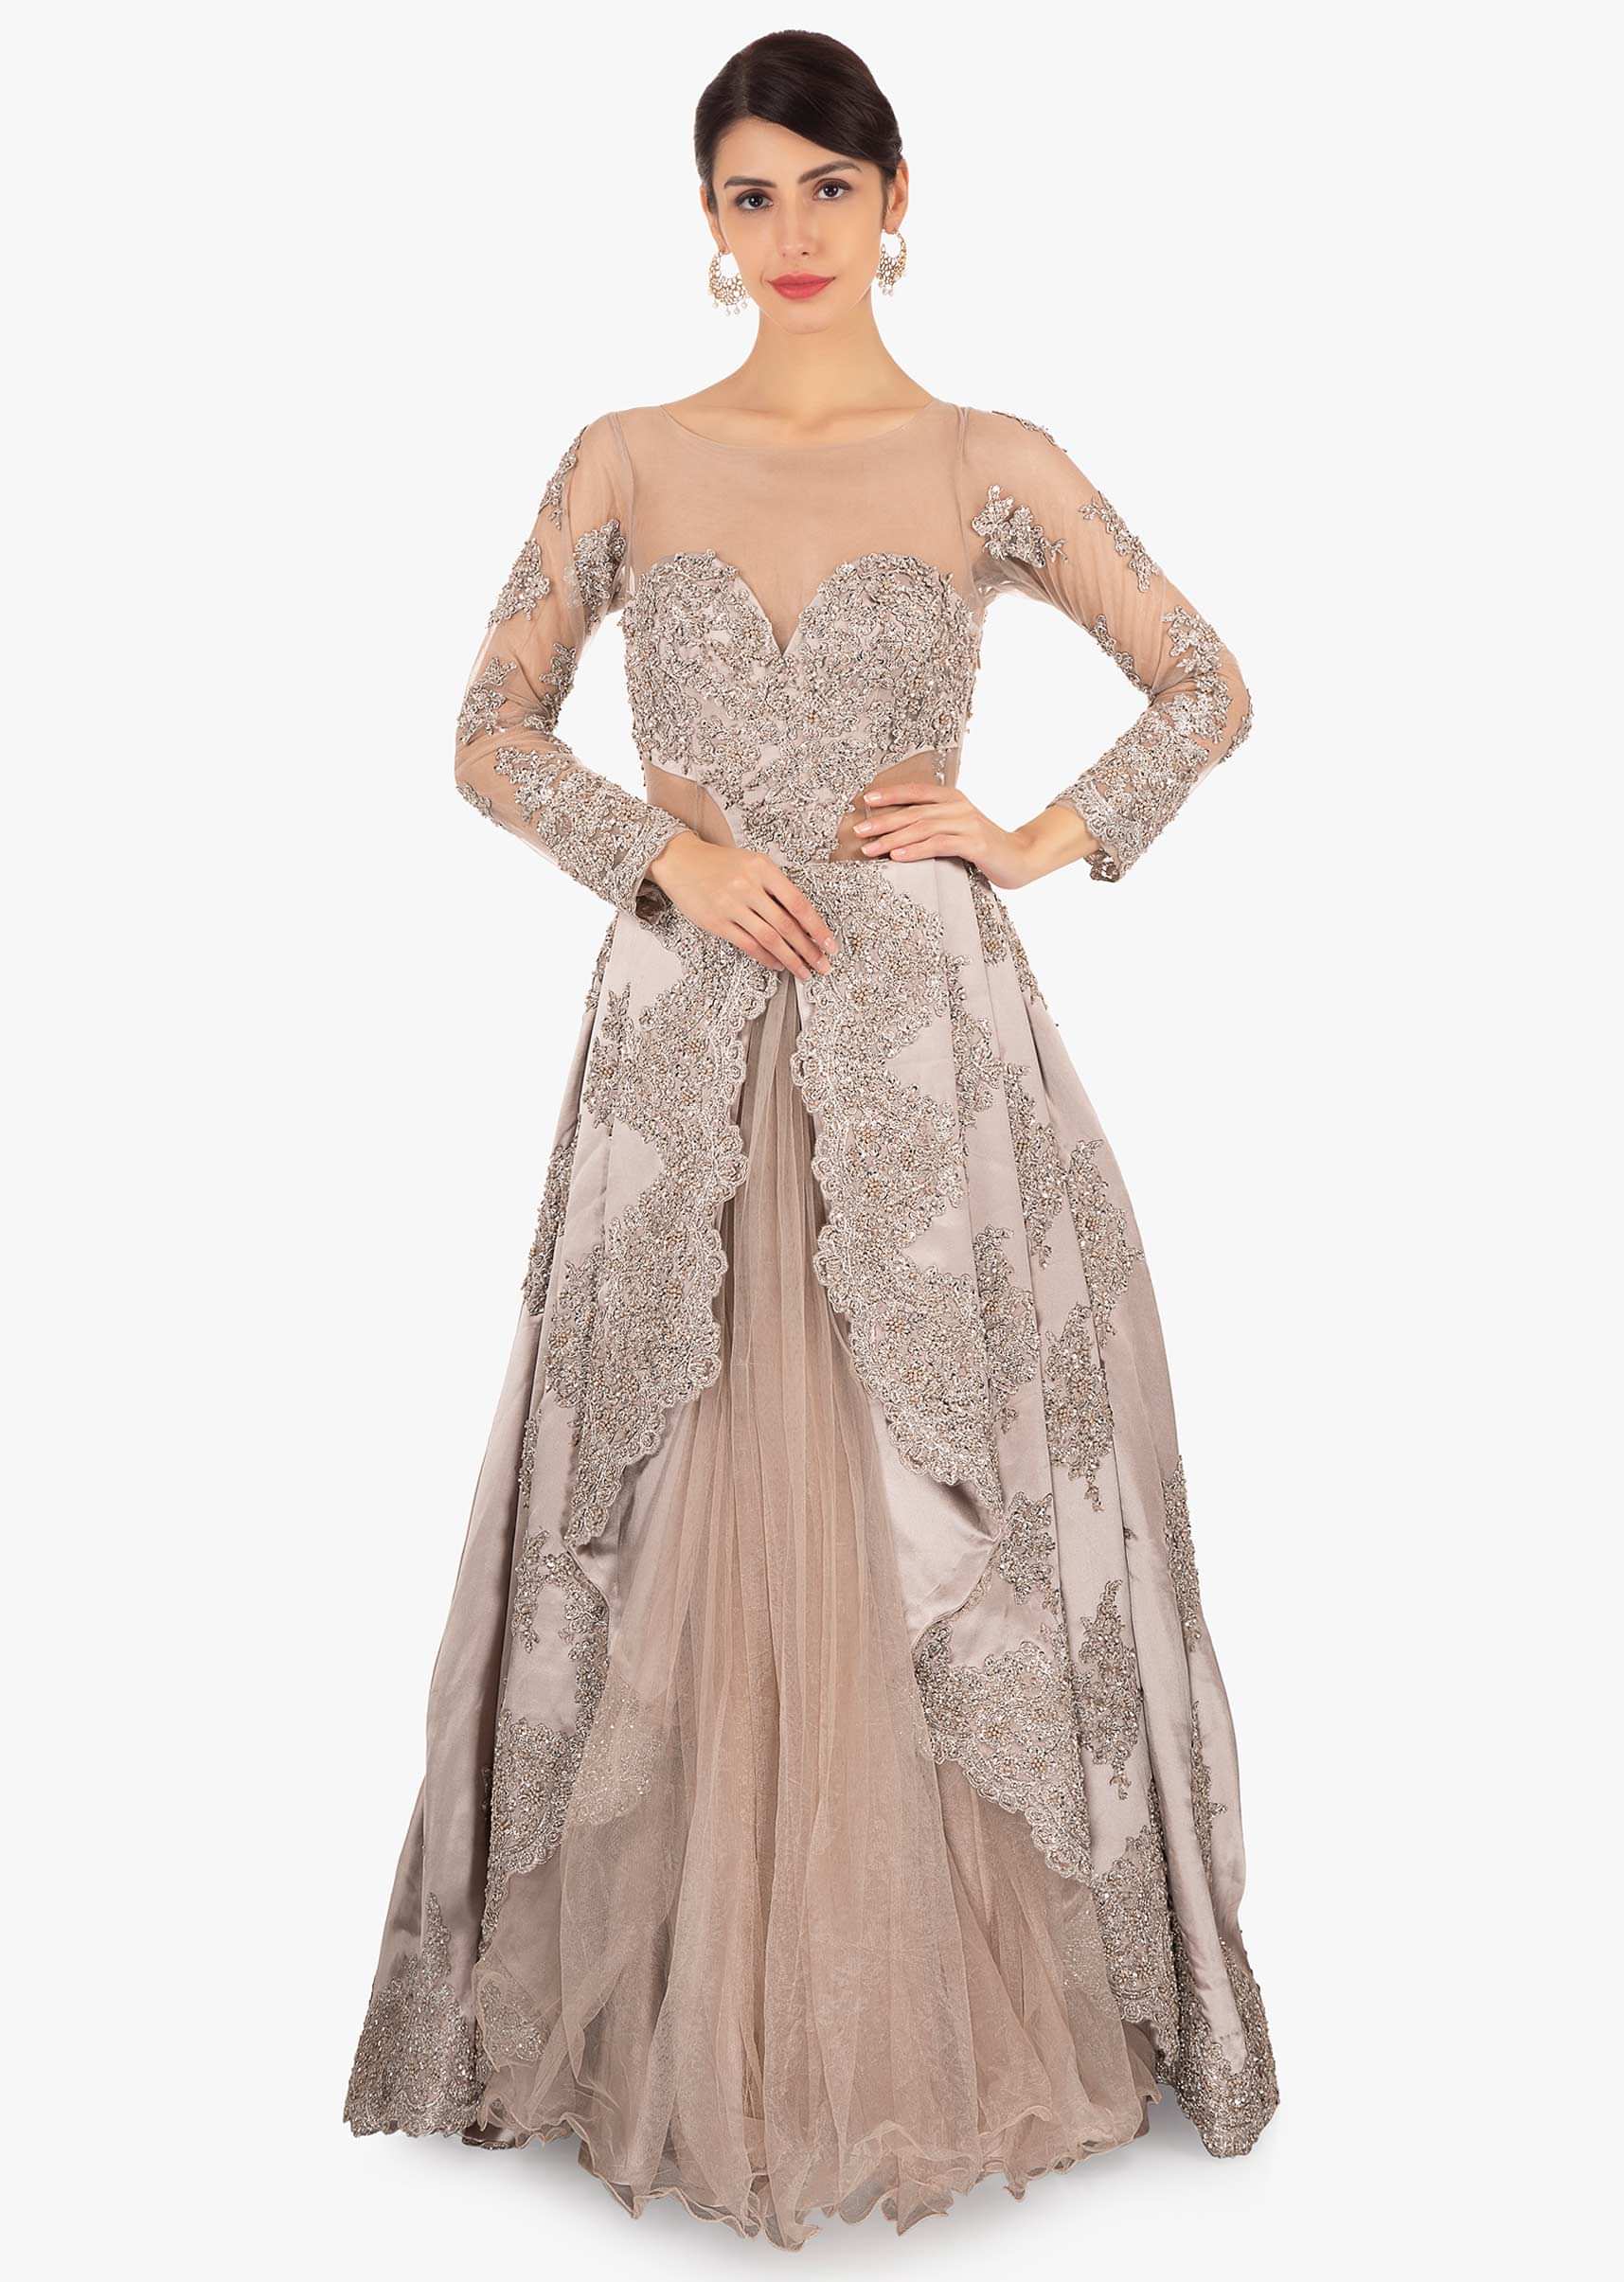 Grey satin gown with chord work and net under layer